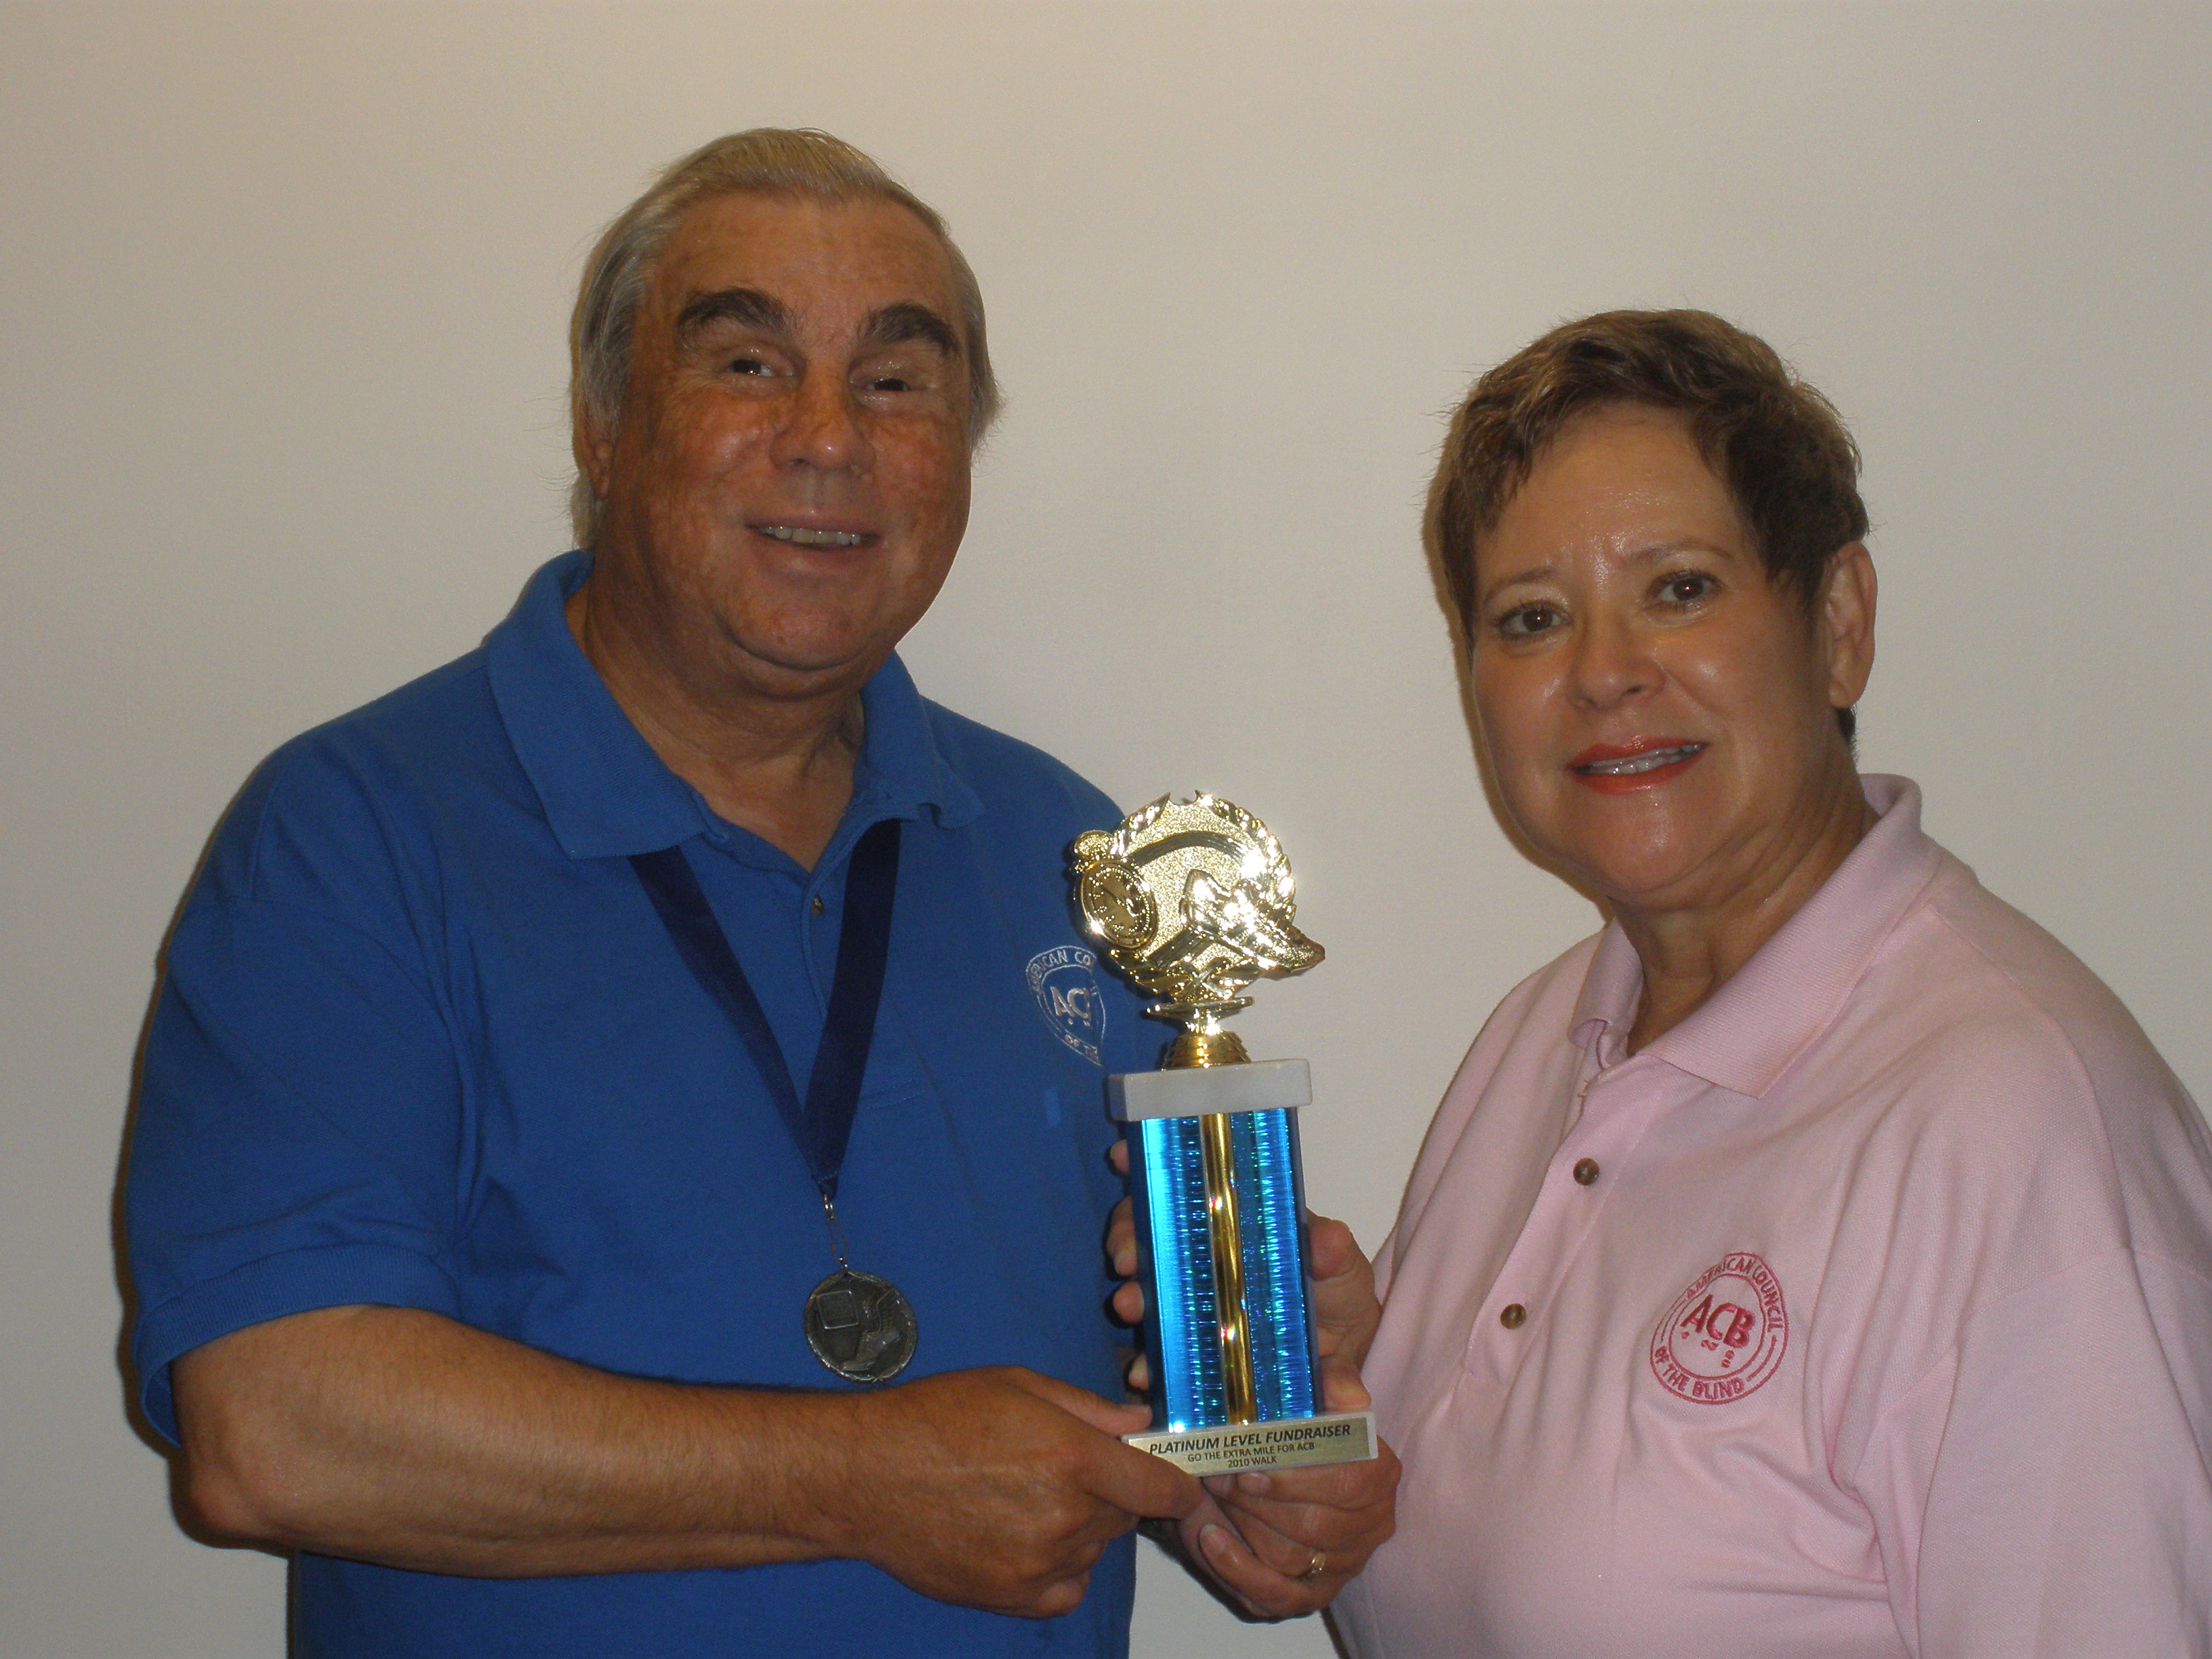 Ron and Palma Milliman with ACB Walk Trophy